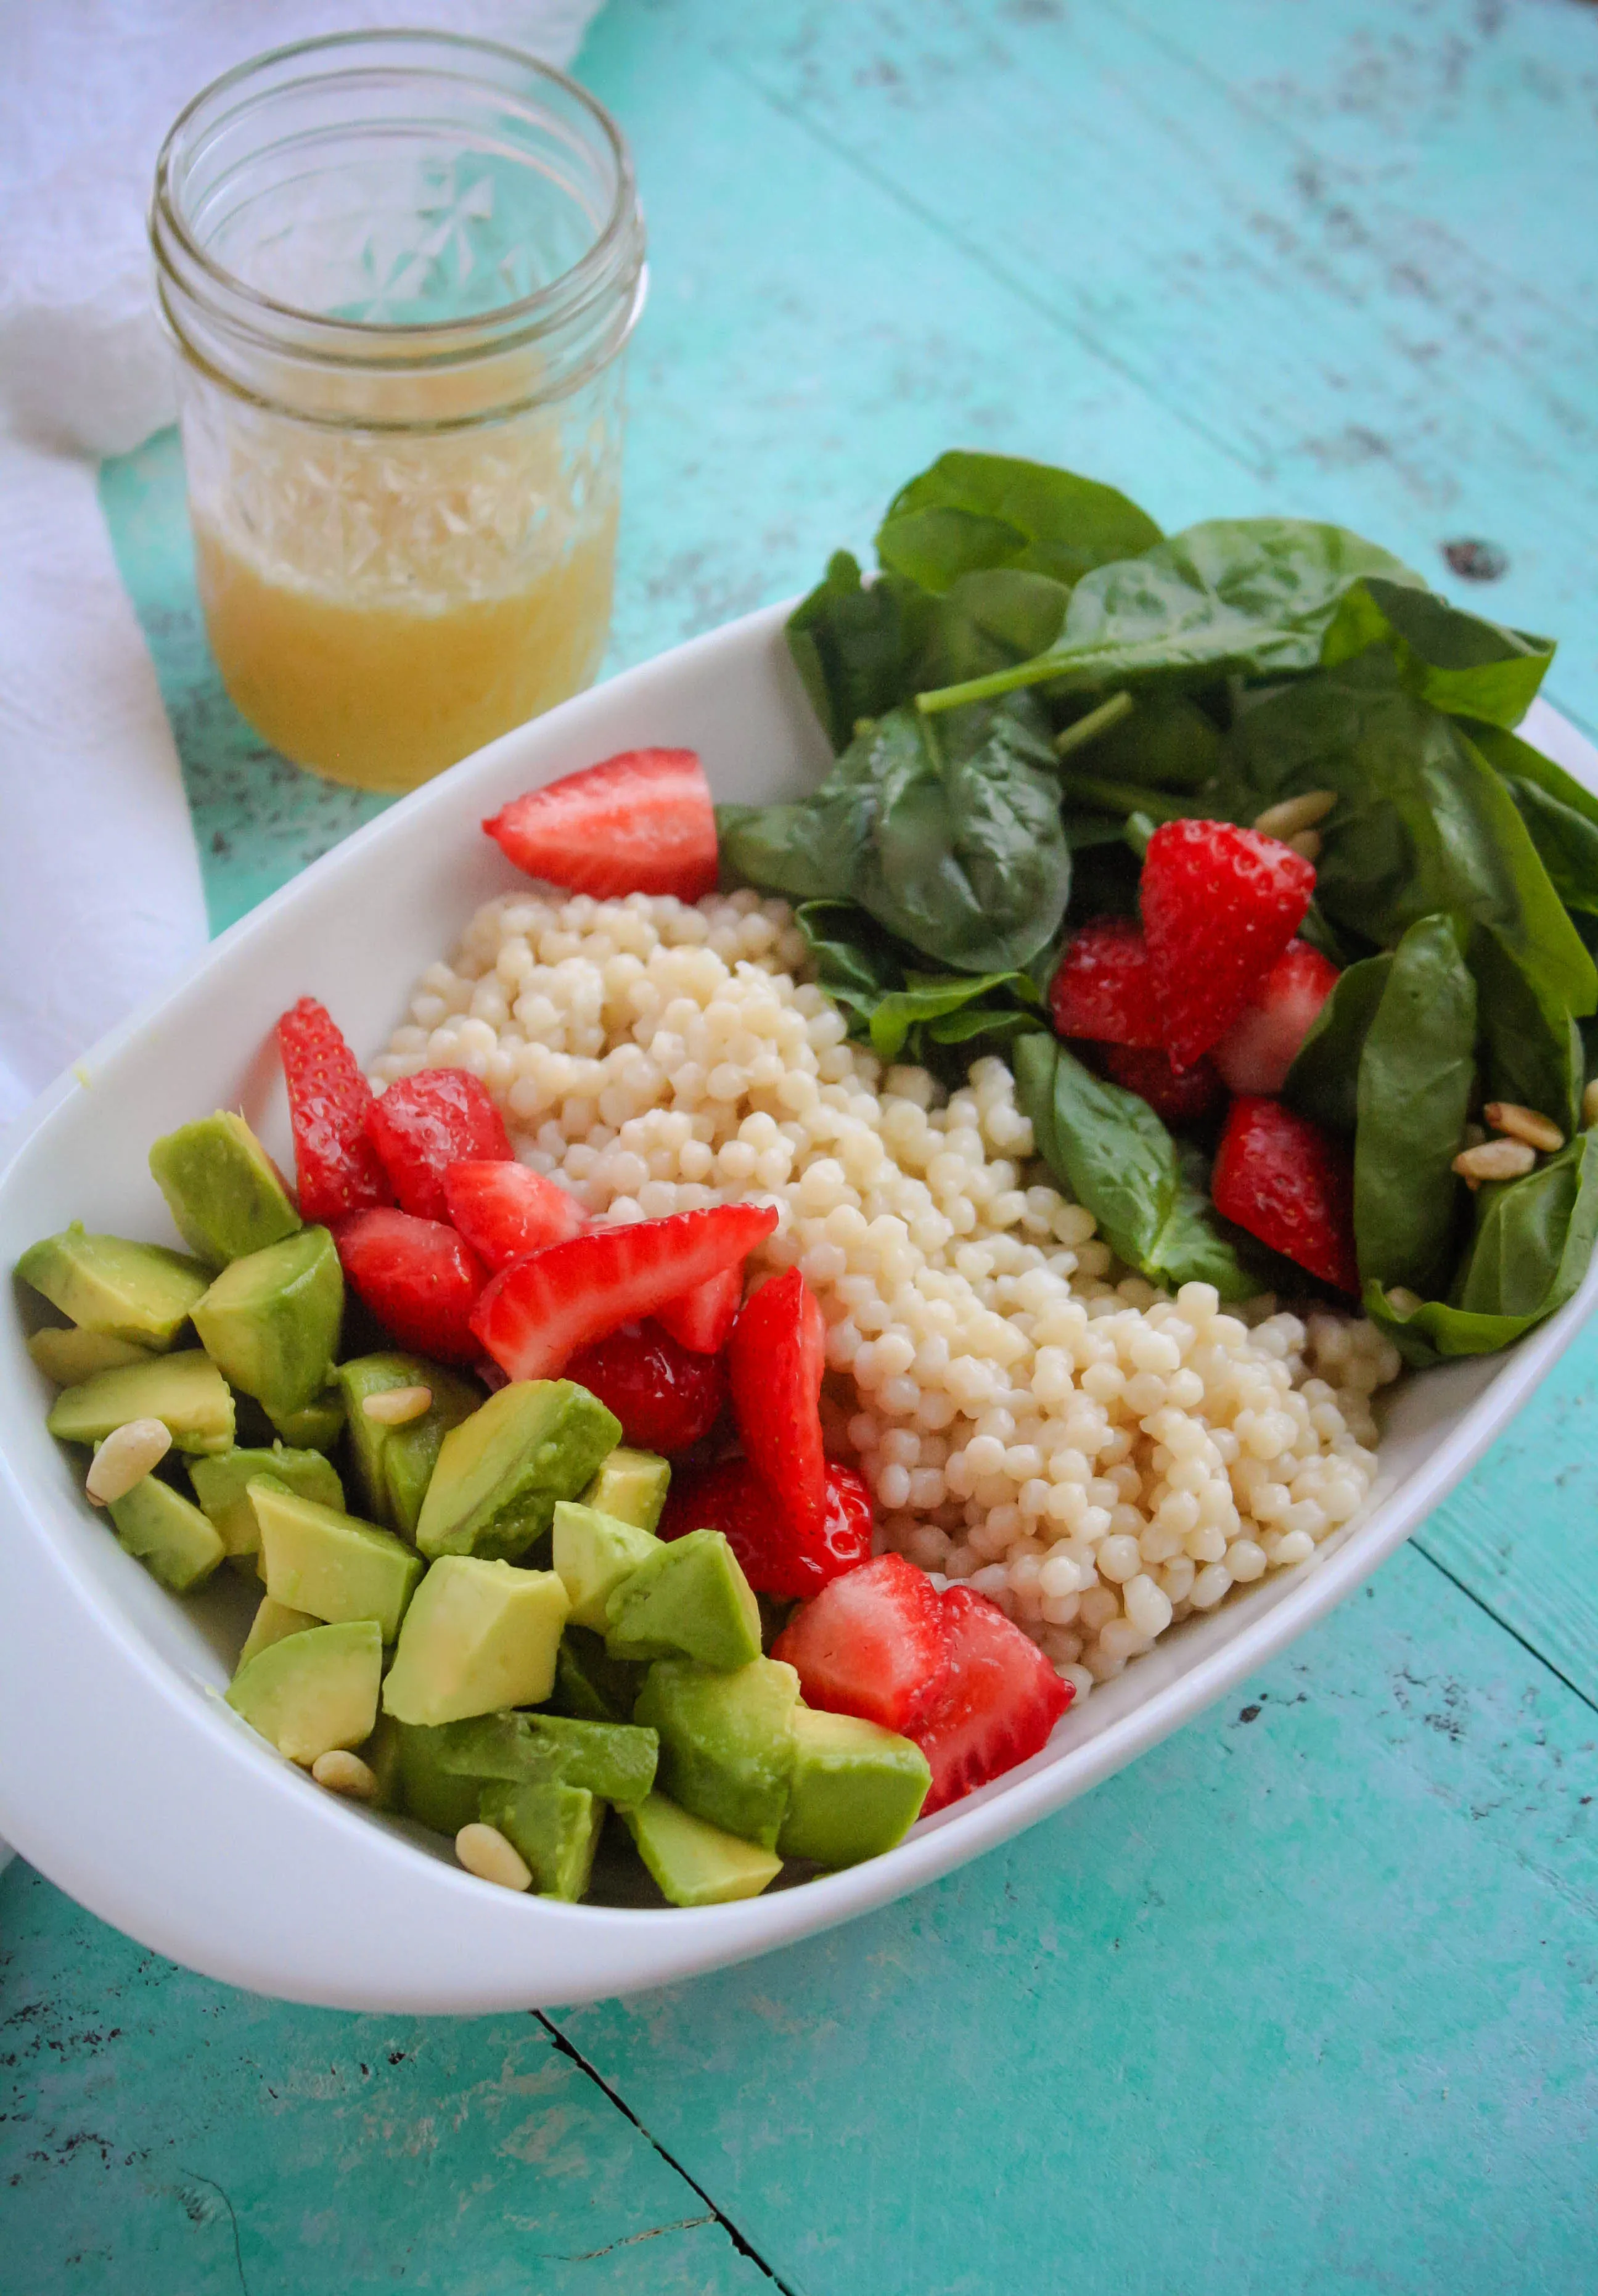 Spinach and Couscous Salad with Strawberries, Avocado & Honey-Lime Dressing is the kind of summer salad that will satisfy! Spinach and Couscous Salad with Strawberries, Avocado & Honey-Lime Dressing is a delightful summer dish.